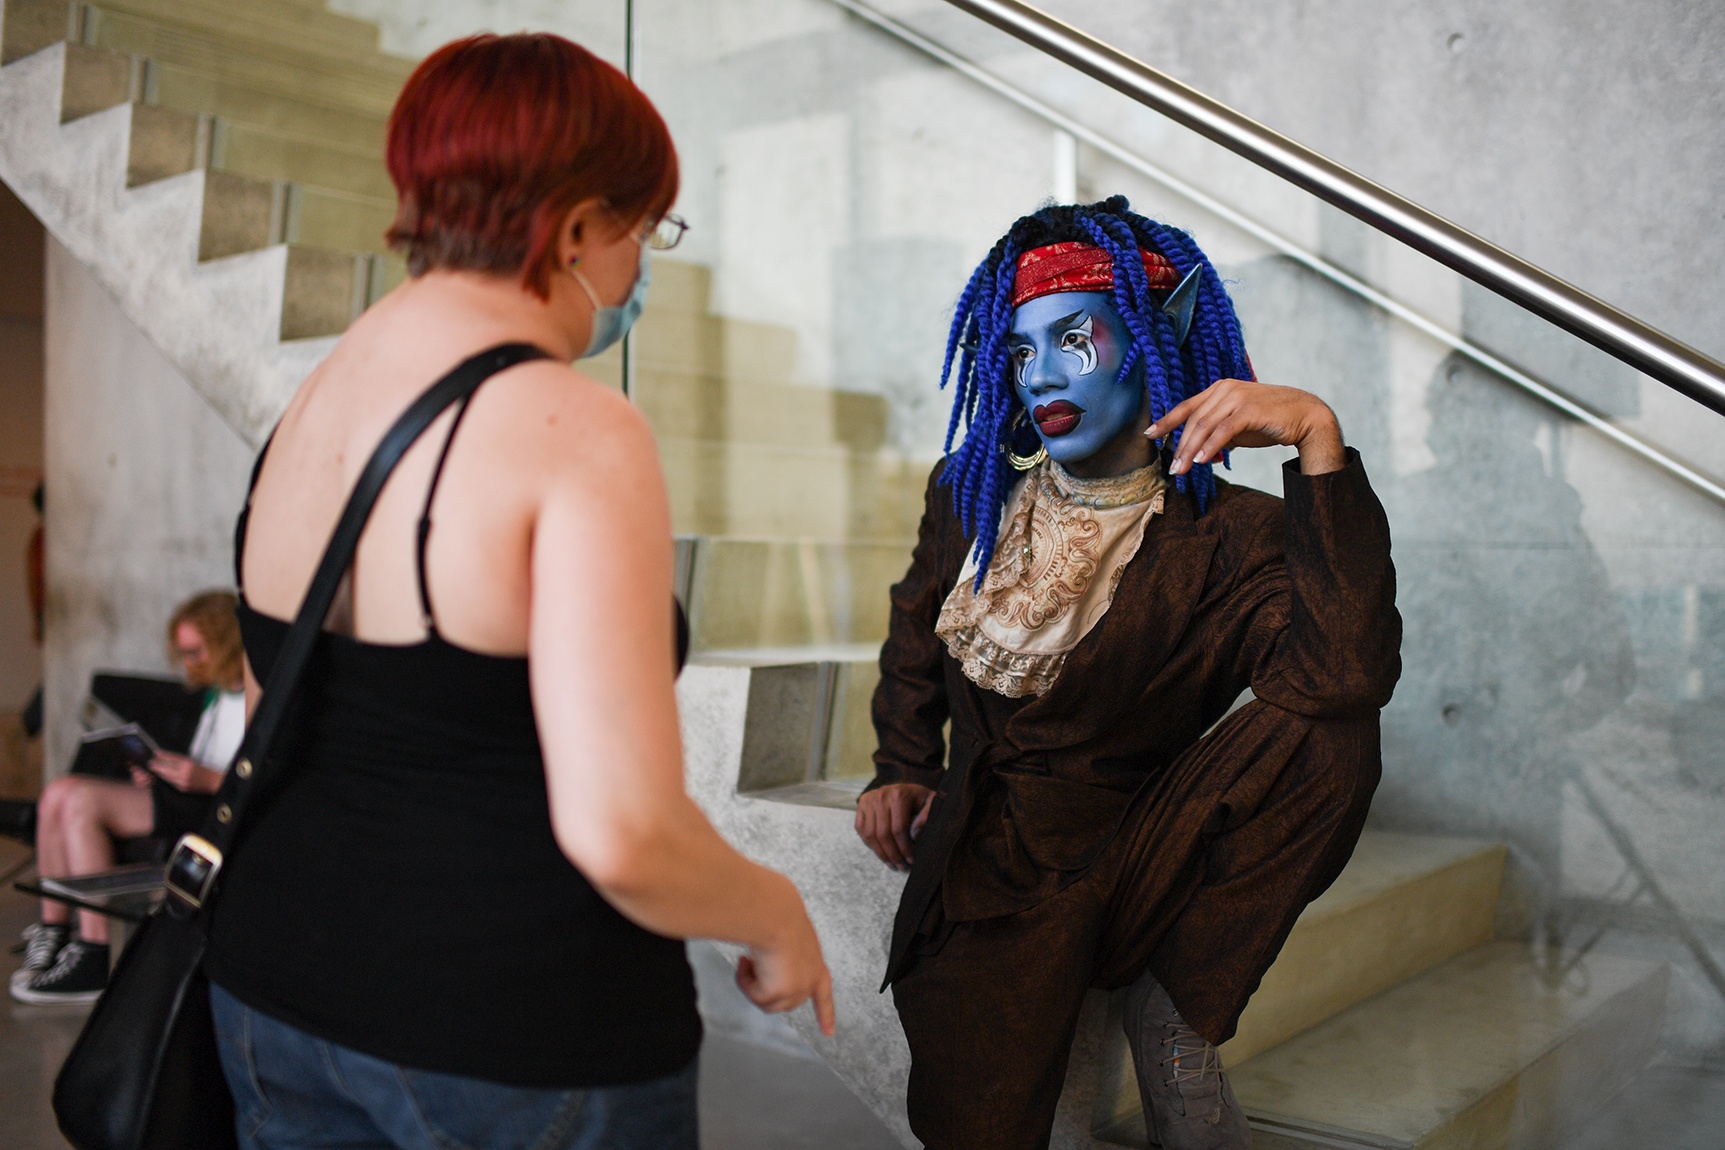 Maxi Glamour wearing blue facial makeup sits perched on the mezzanine stairs while talking to a program visitor